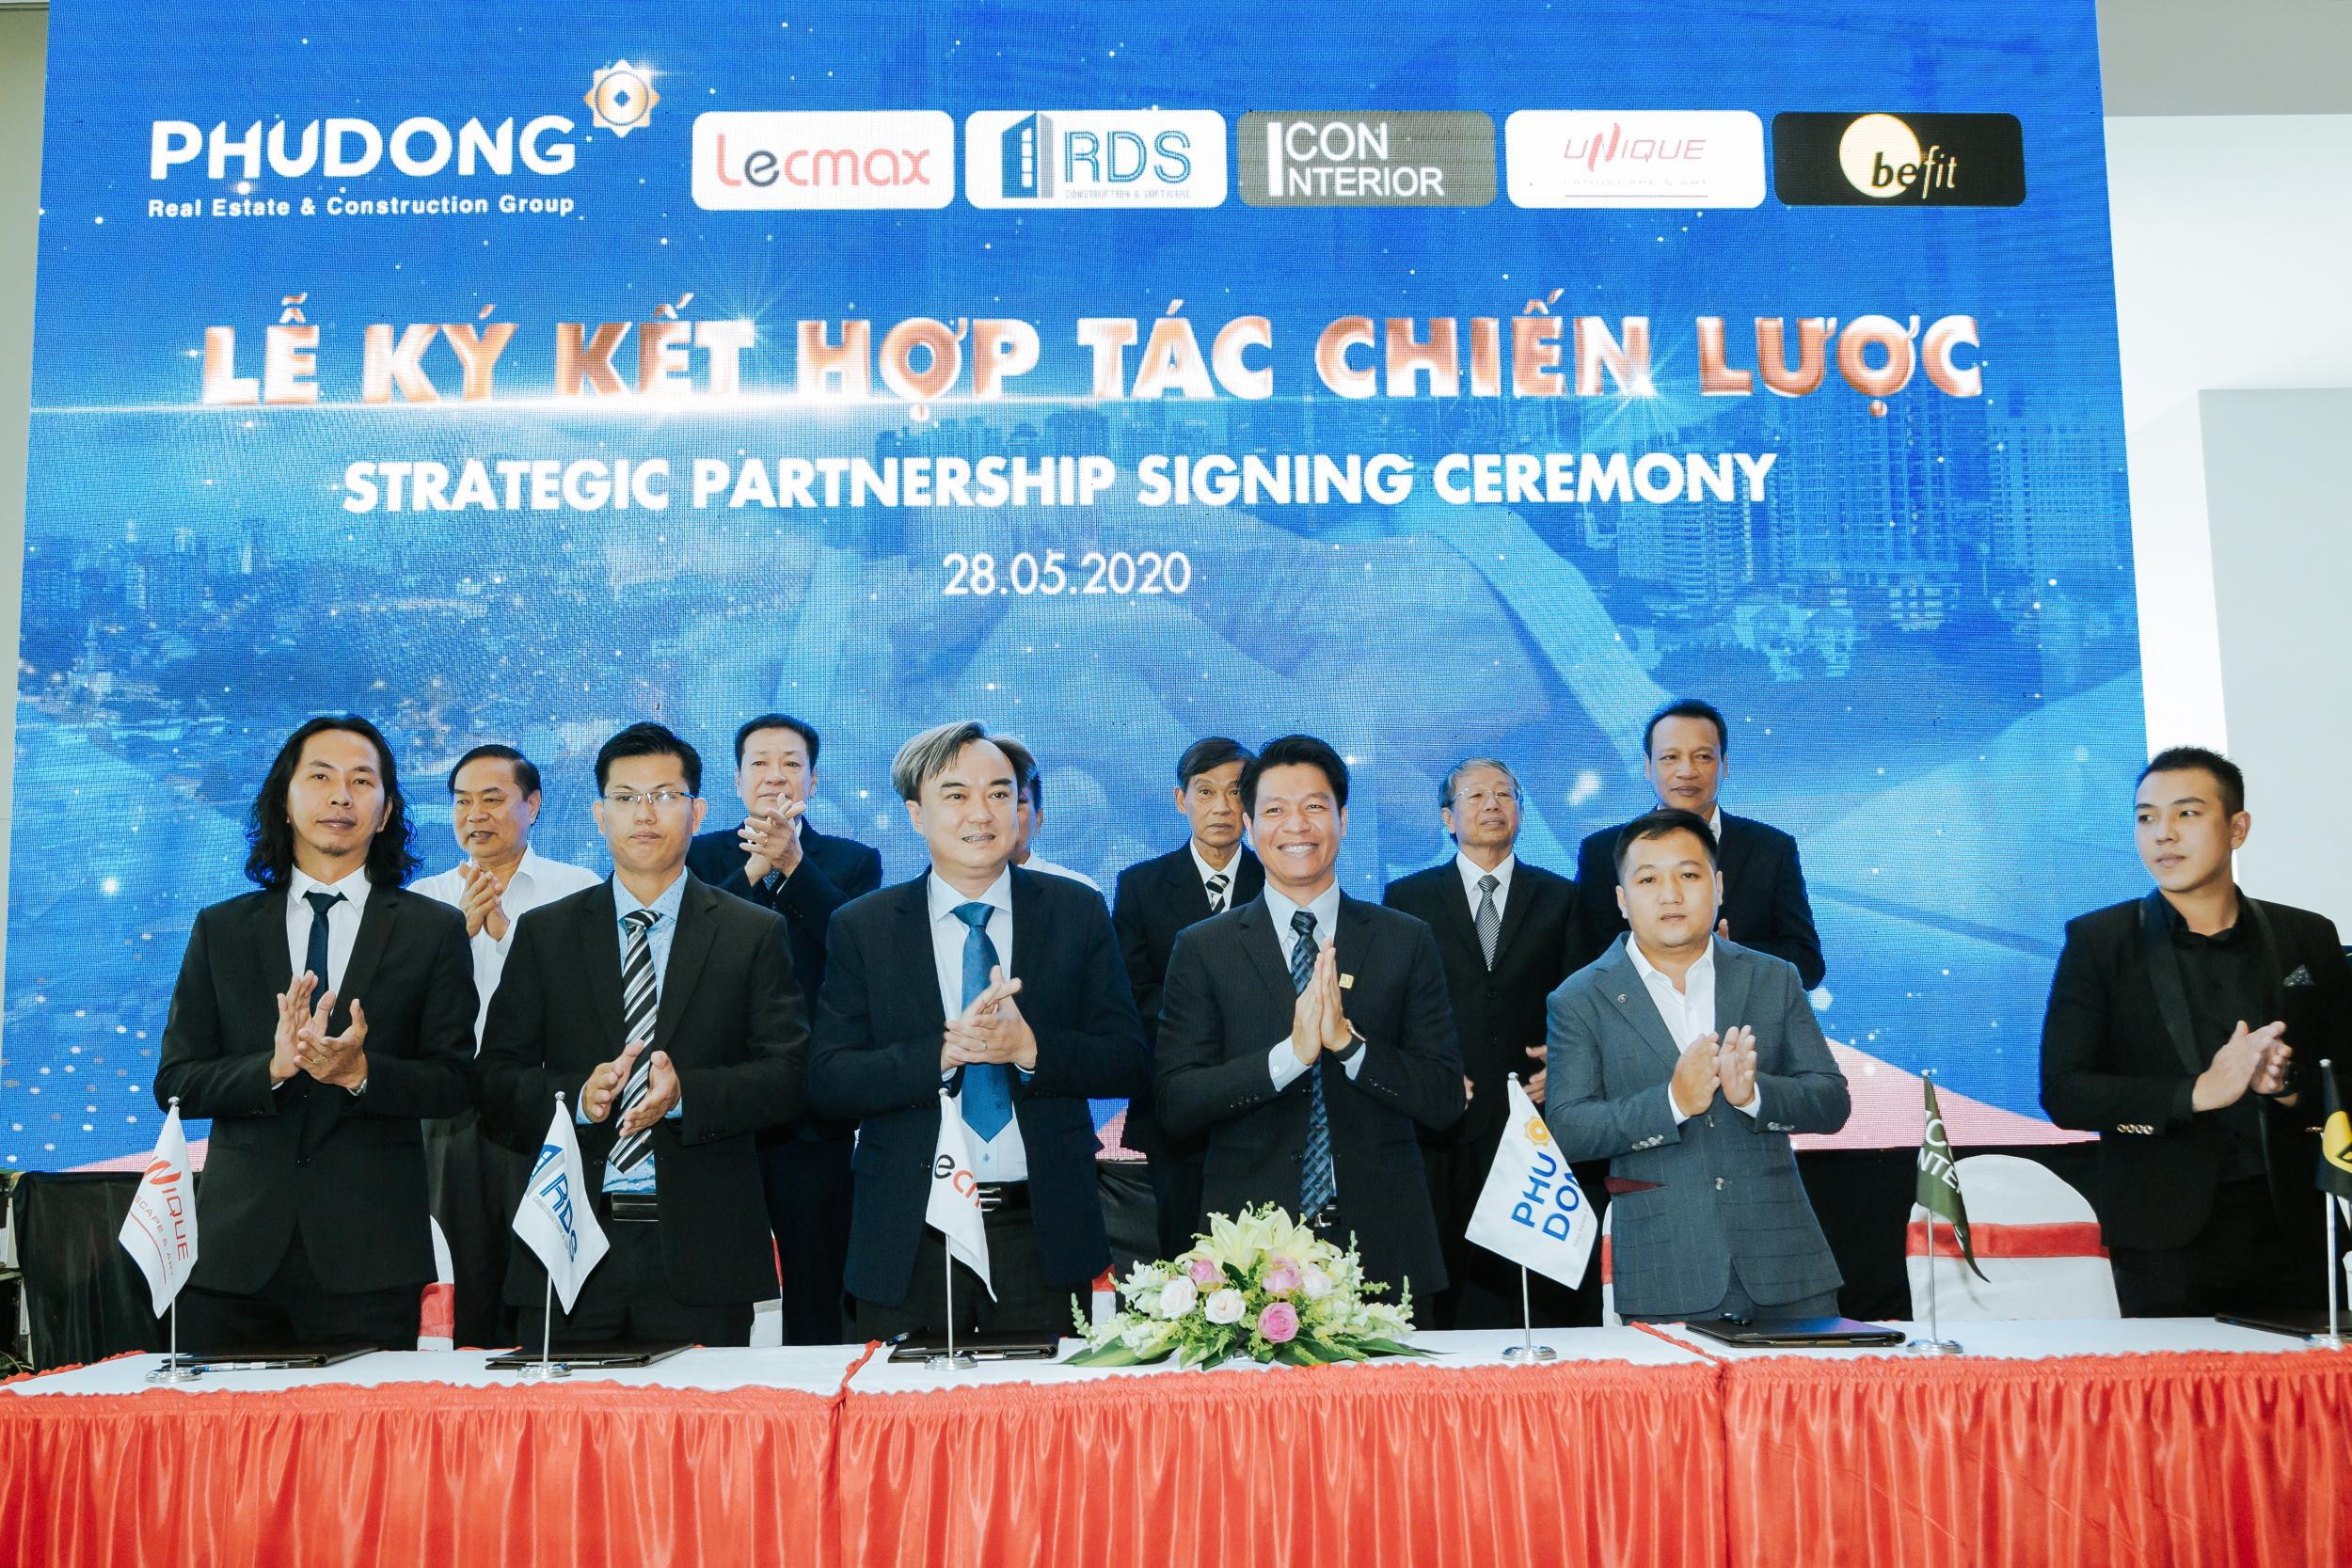  The signing ceremony of strategic cooperation with Phu Dong Group